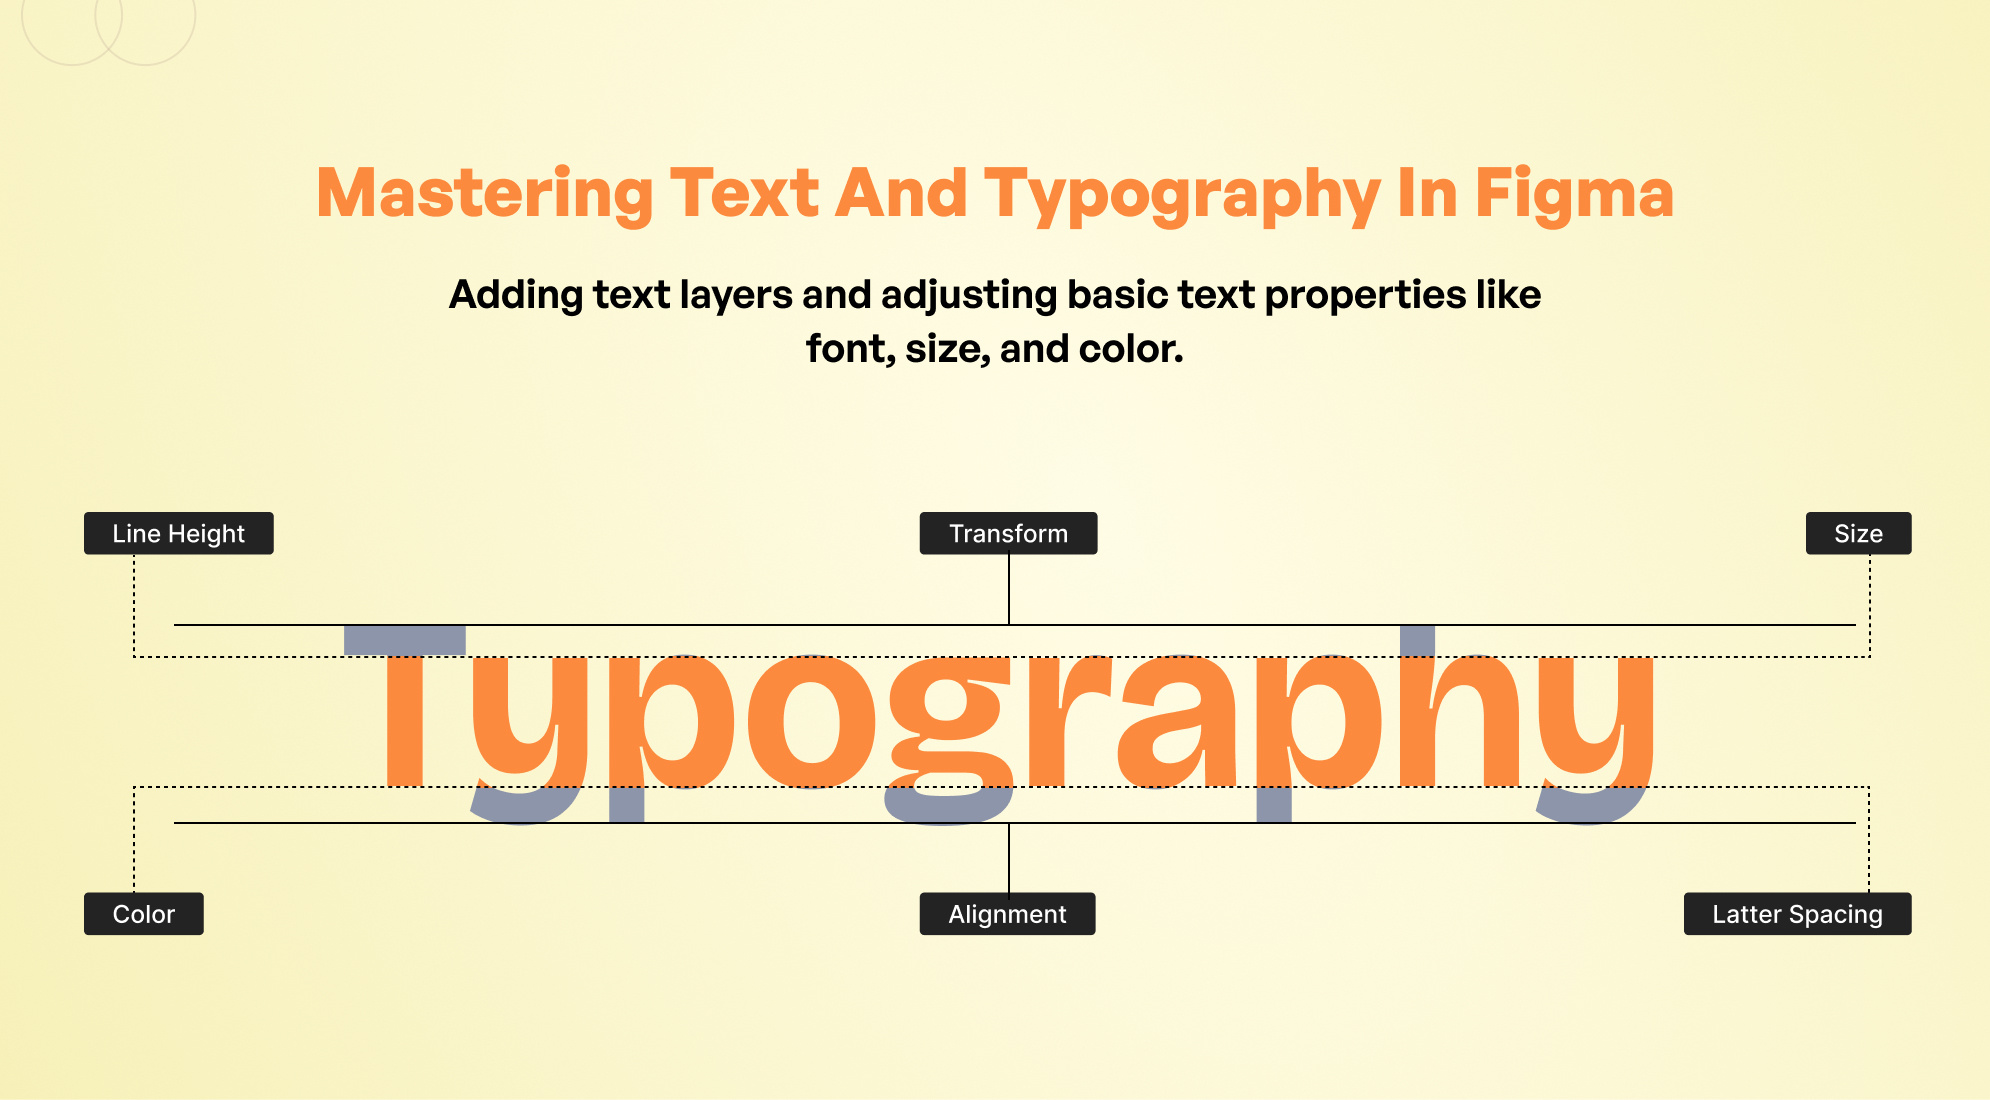 Mastering Text and Typography in Figma